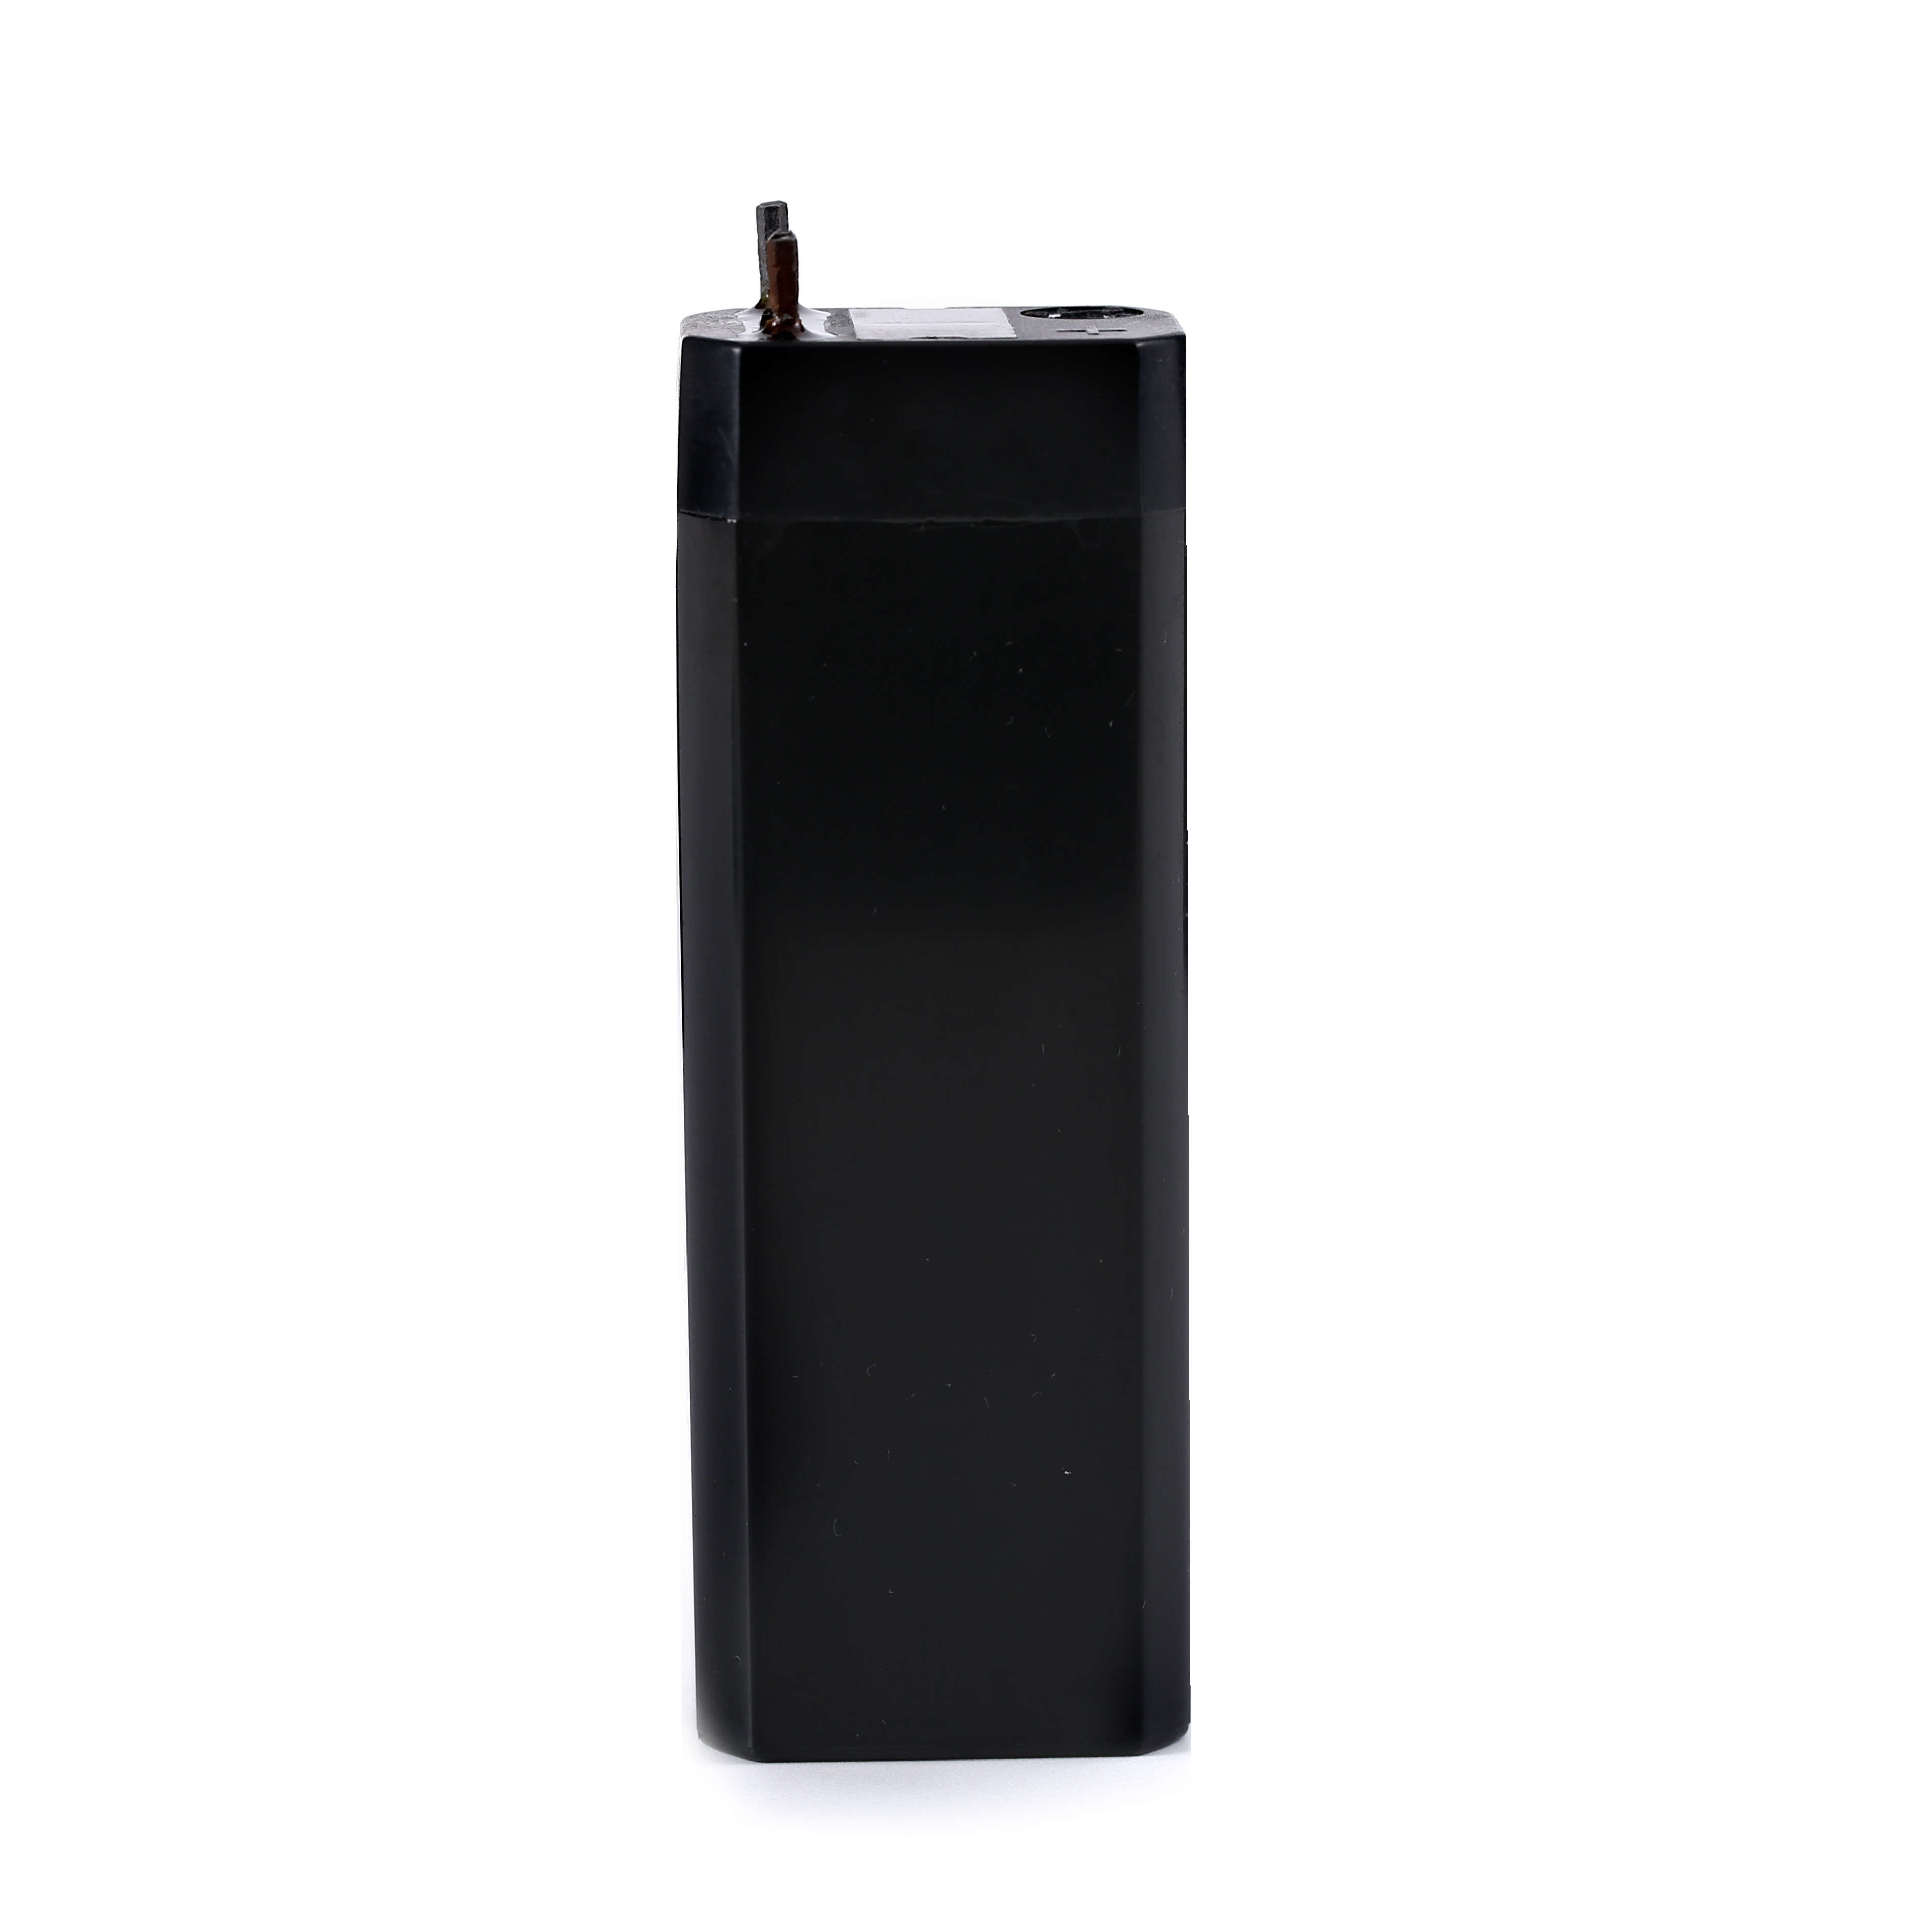  Small Rechargeable 4v0.8ah Agm Lead Acid Battery For Electric Mosquito Swatter Manufactures